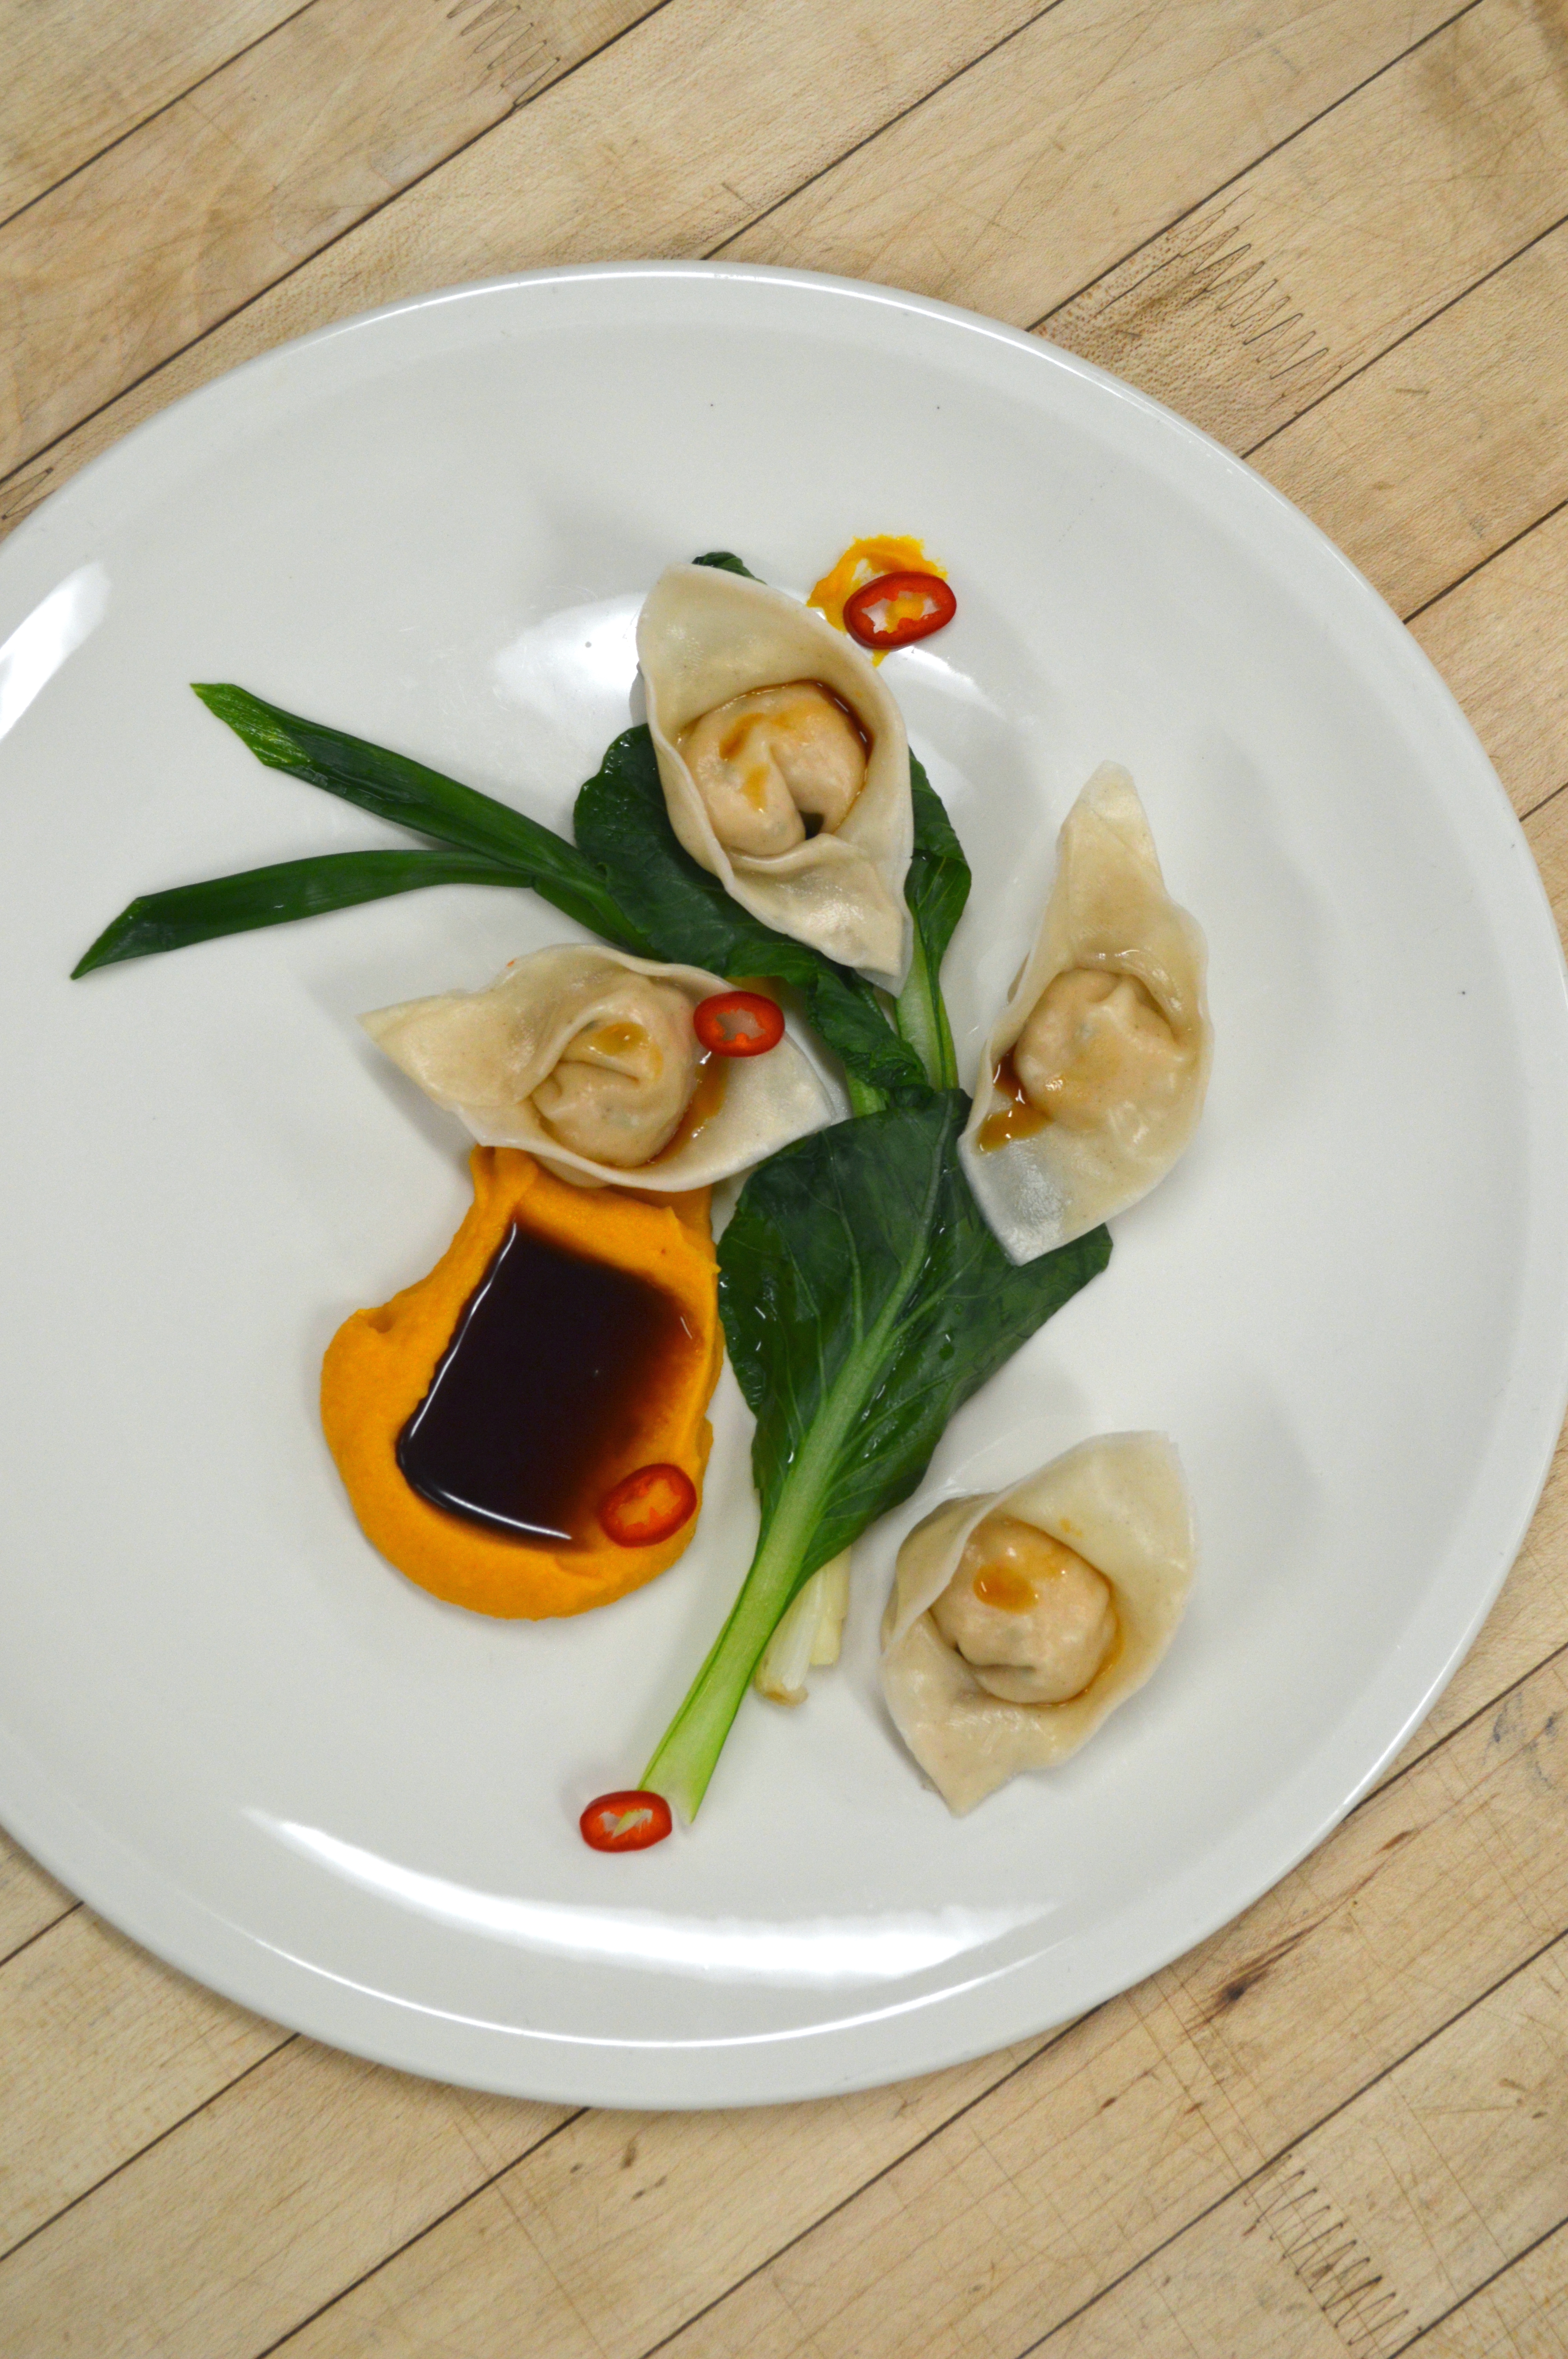 Salmon wontons with gai choi, scallion, soy dipping sauce, and chili.